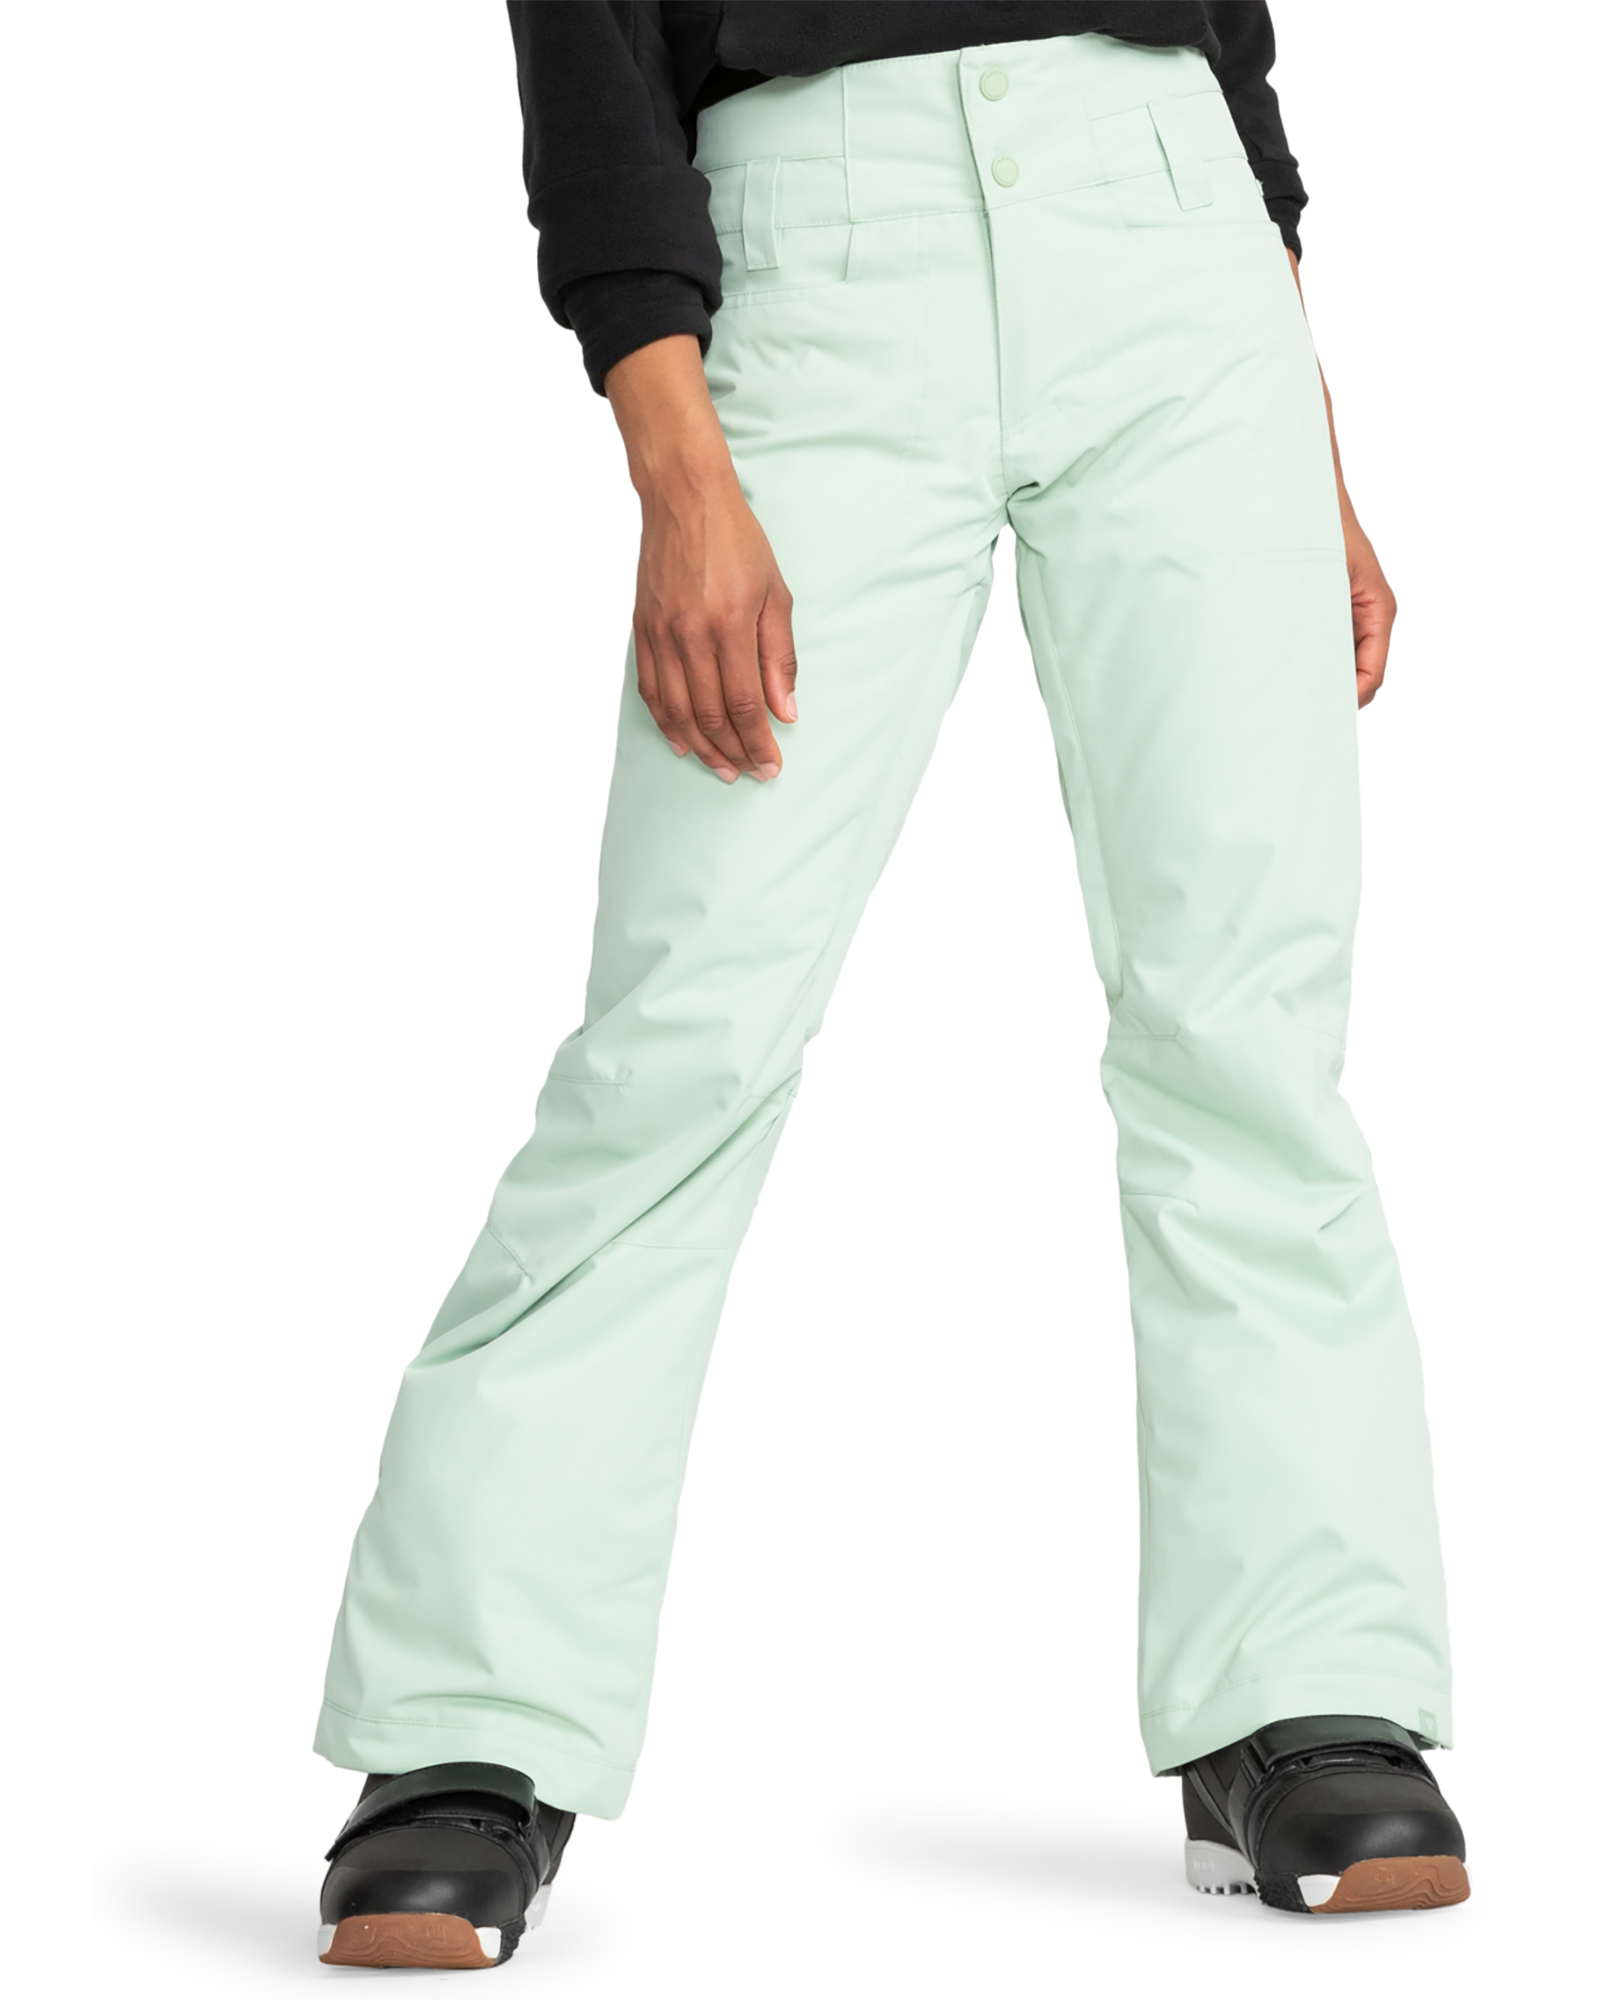 Roxy Women’s Division Pants - Cameo Green S